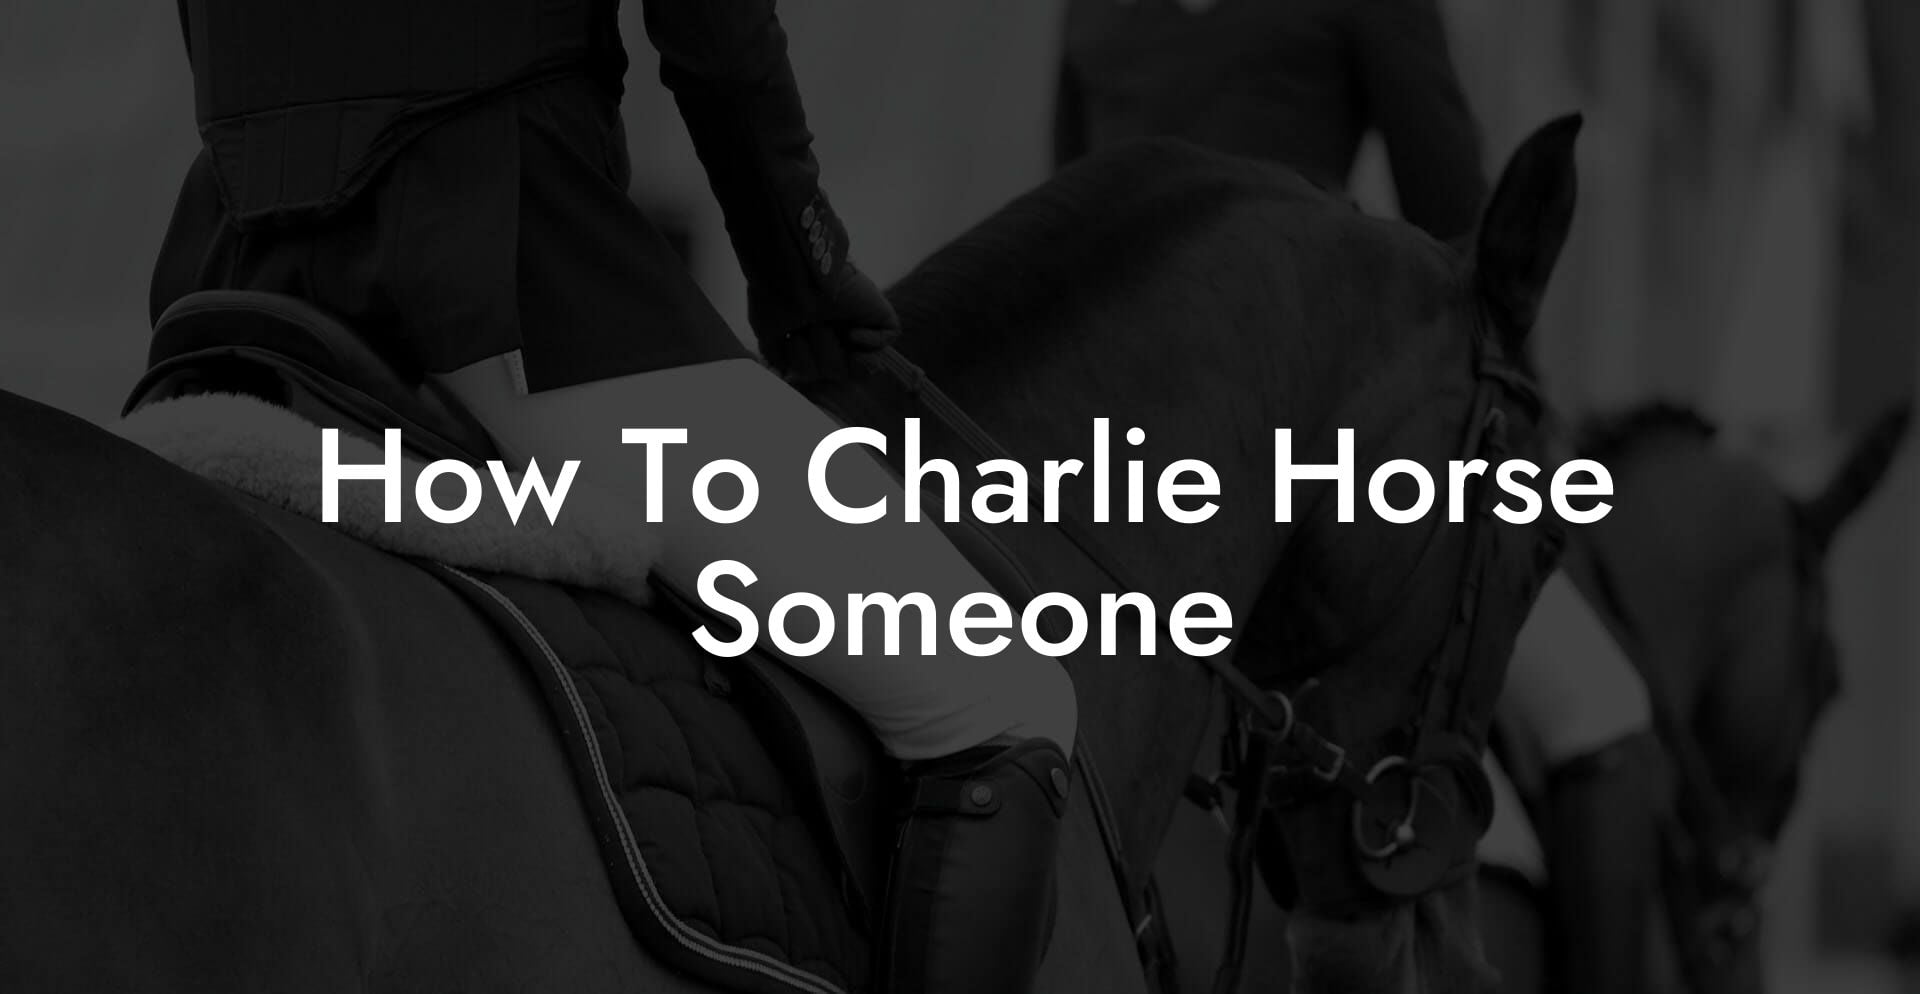 How To Charlie Horse Someone - How To Own a Horse